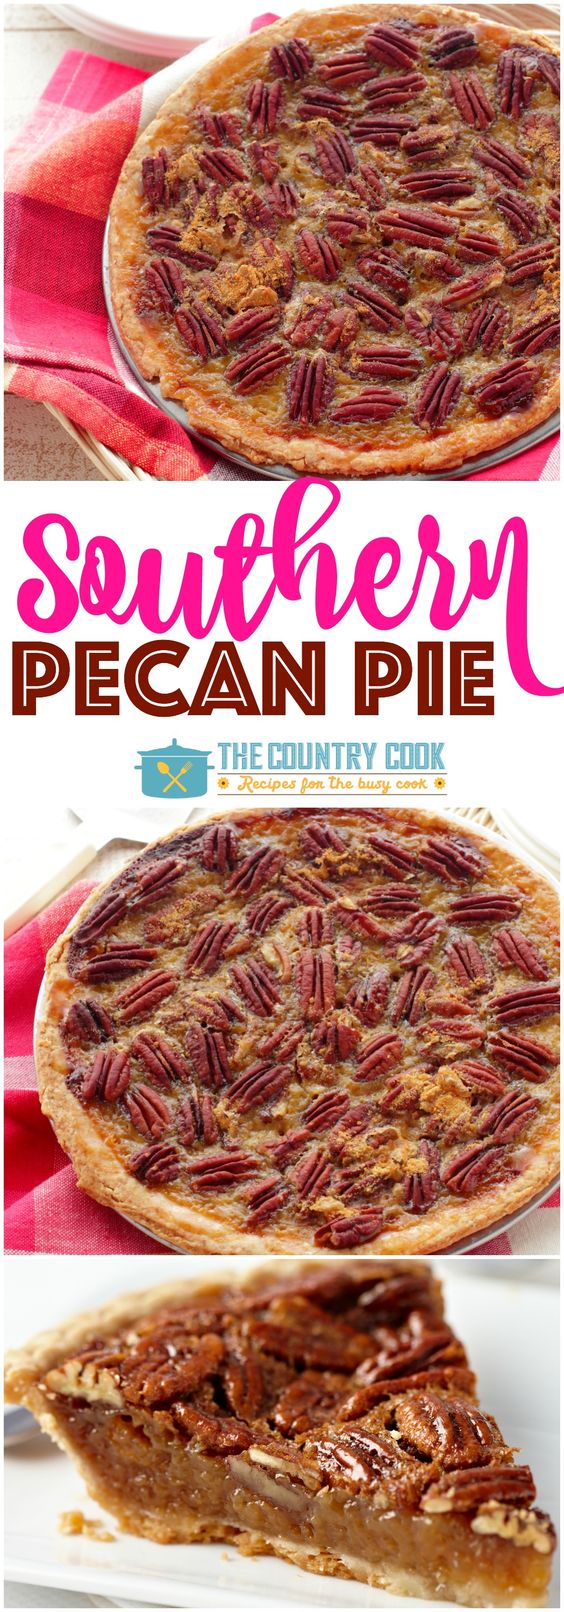 There is nothing like Homemade Southern Pecan Pie. This recipe has won baking contests! It goes perfectly with my simple Wham Bam Pie Crust!